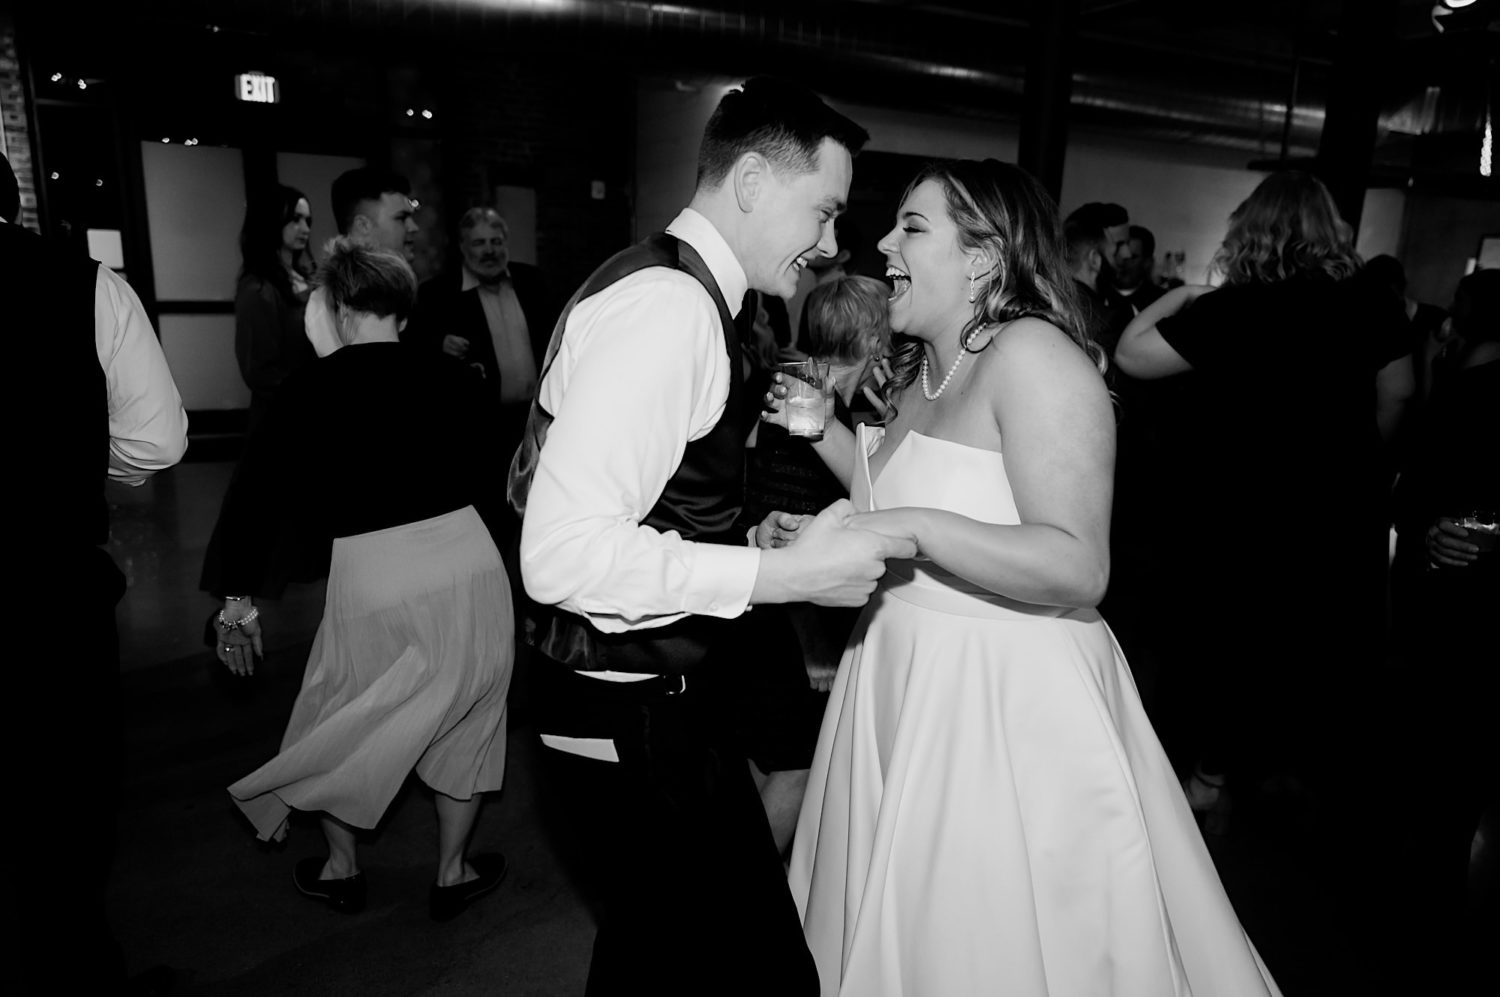 bride and groom candid dancing photos the river center des moines